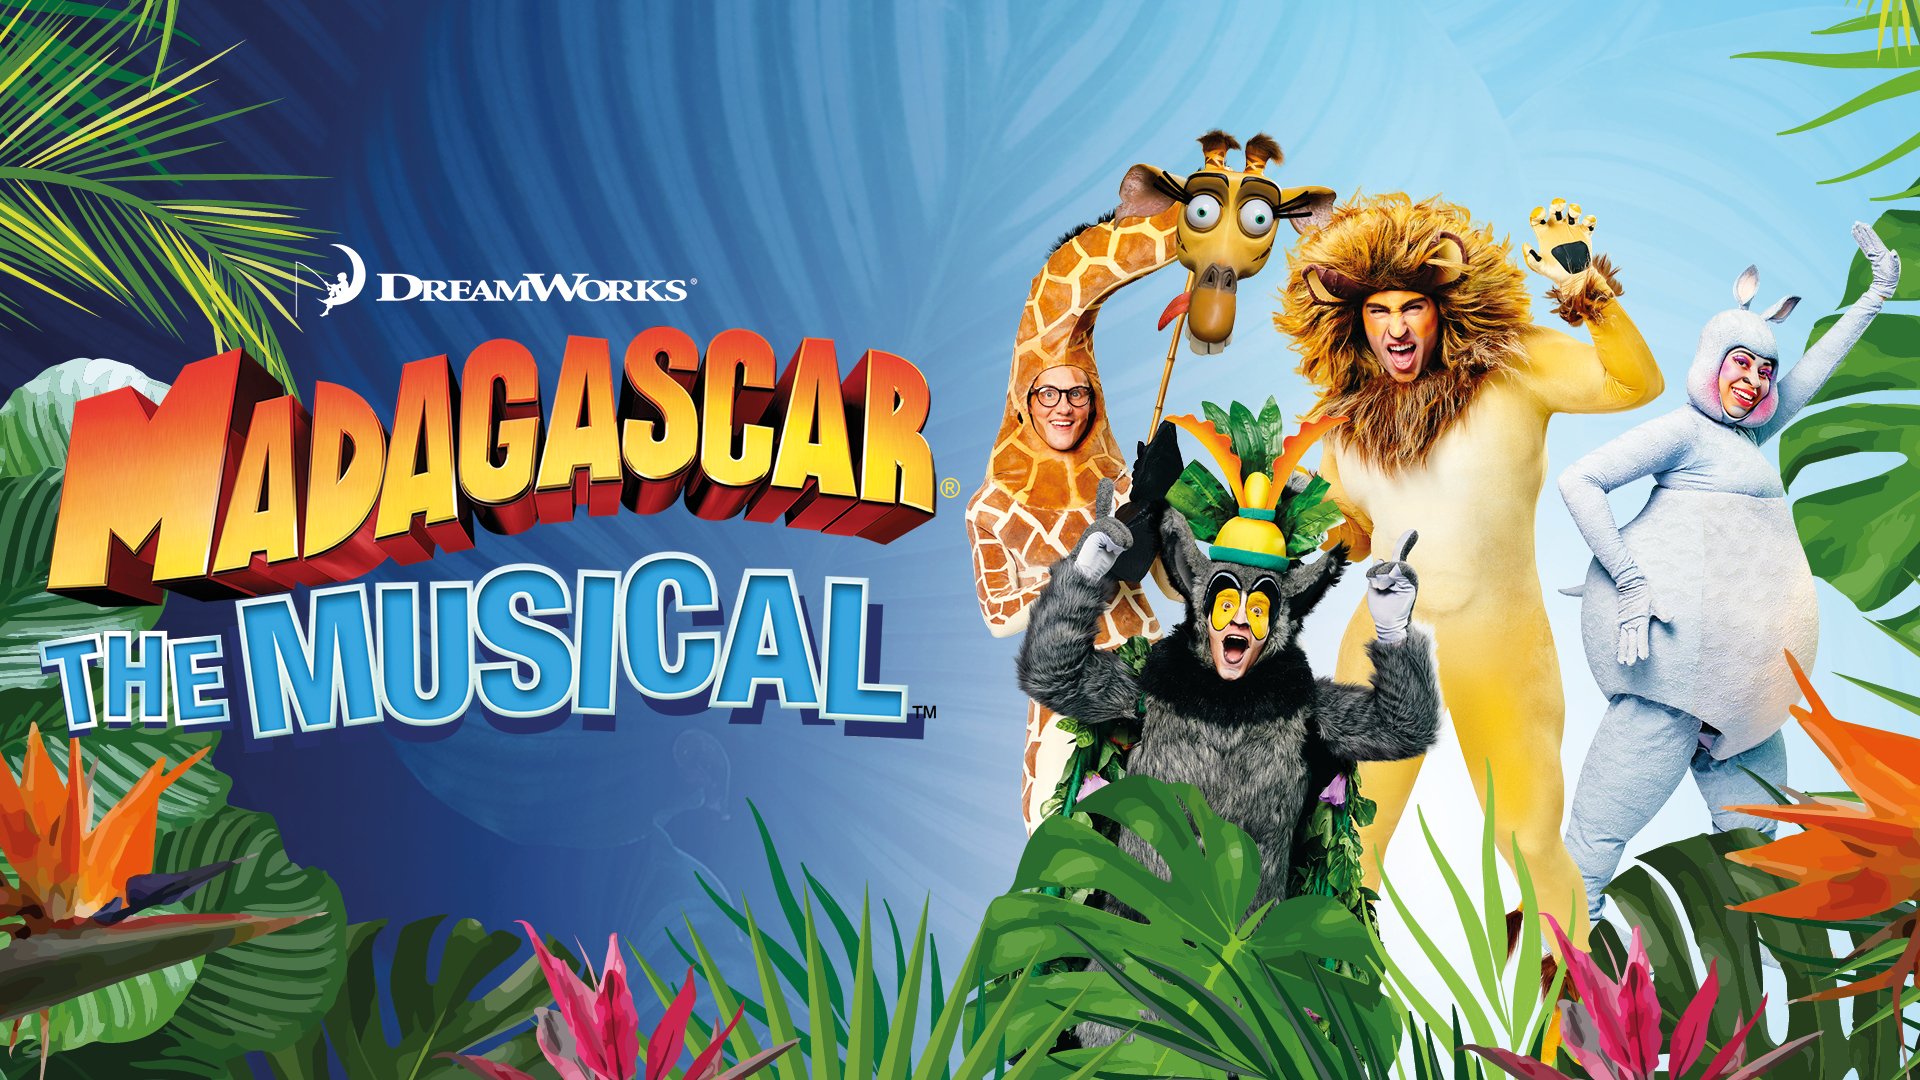 Characters from Madagascar the Musical